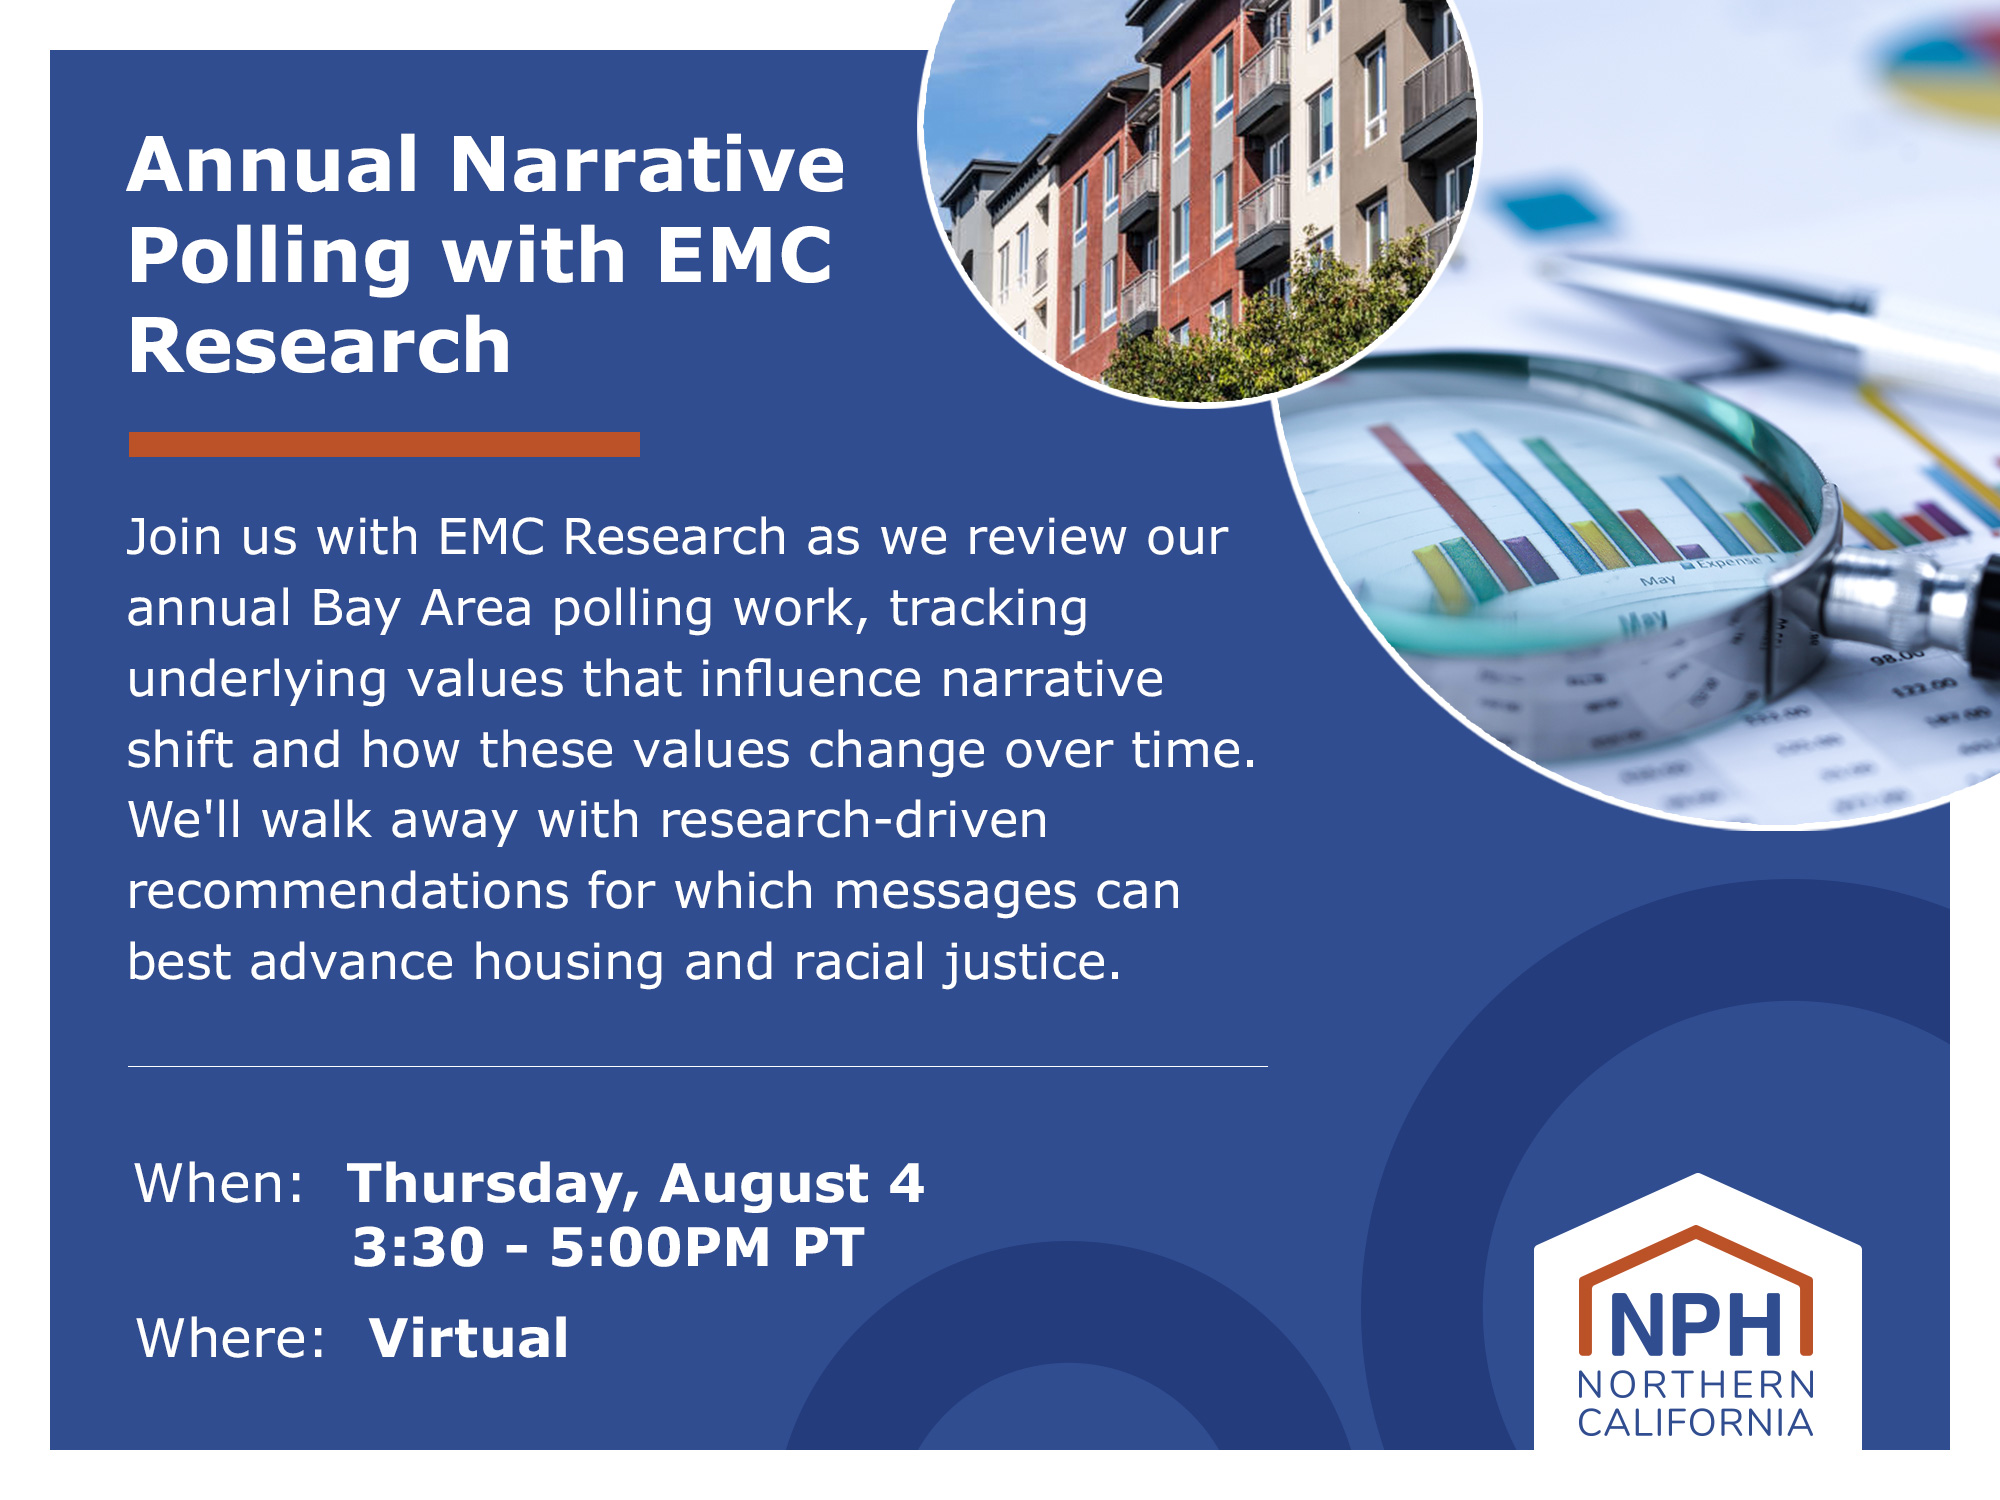 Flyer for Annual Narrative training